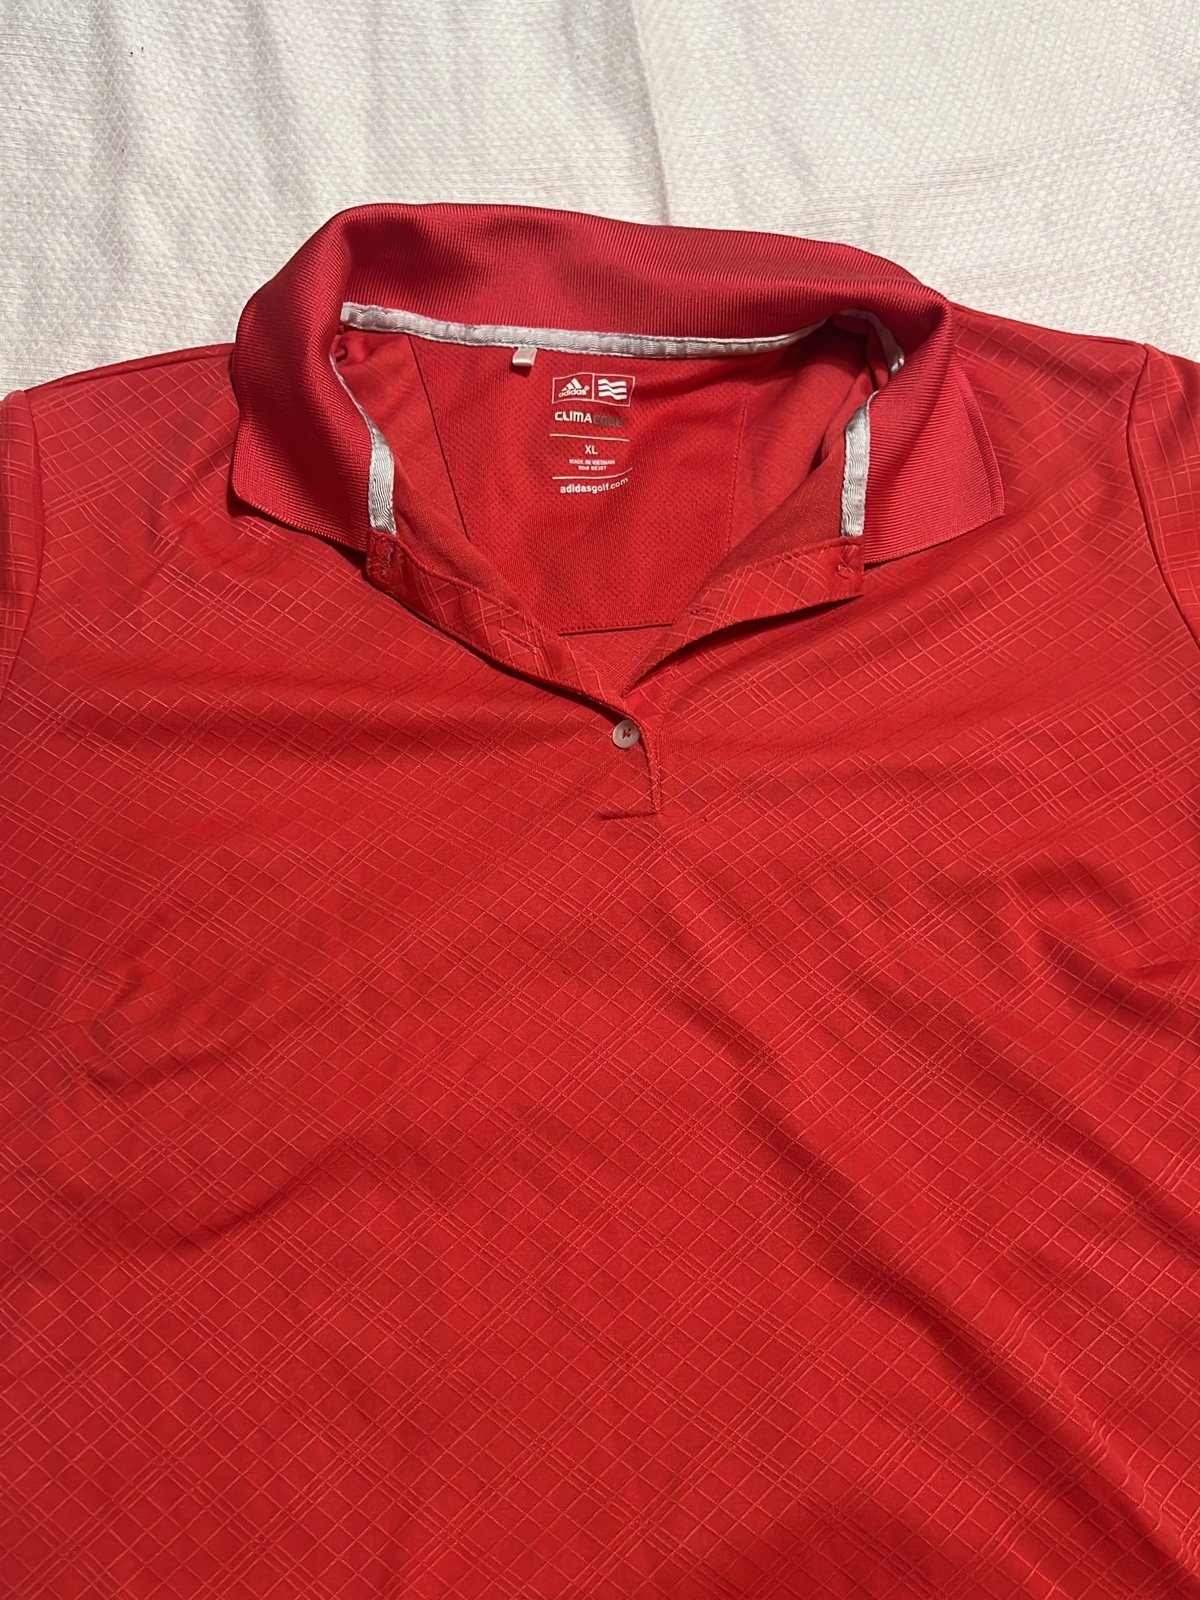 Discounted ADIDAS GOLF CLIMACOOL POLO SHIRT Red XL HCaqCXMrn Counter Genuine 